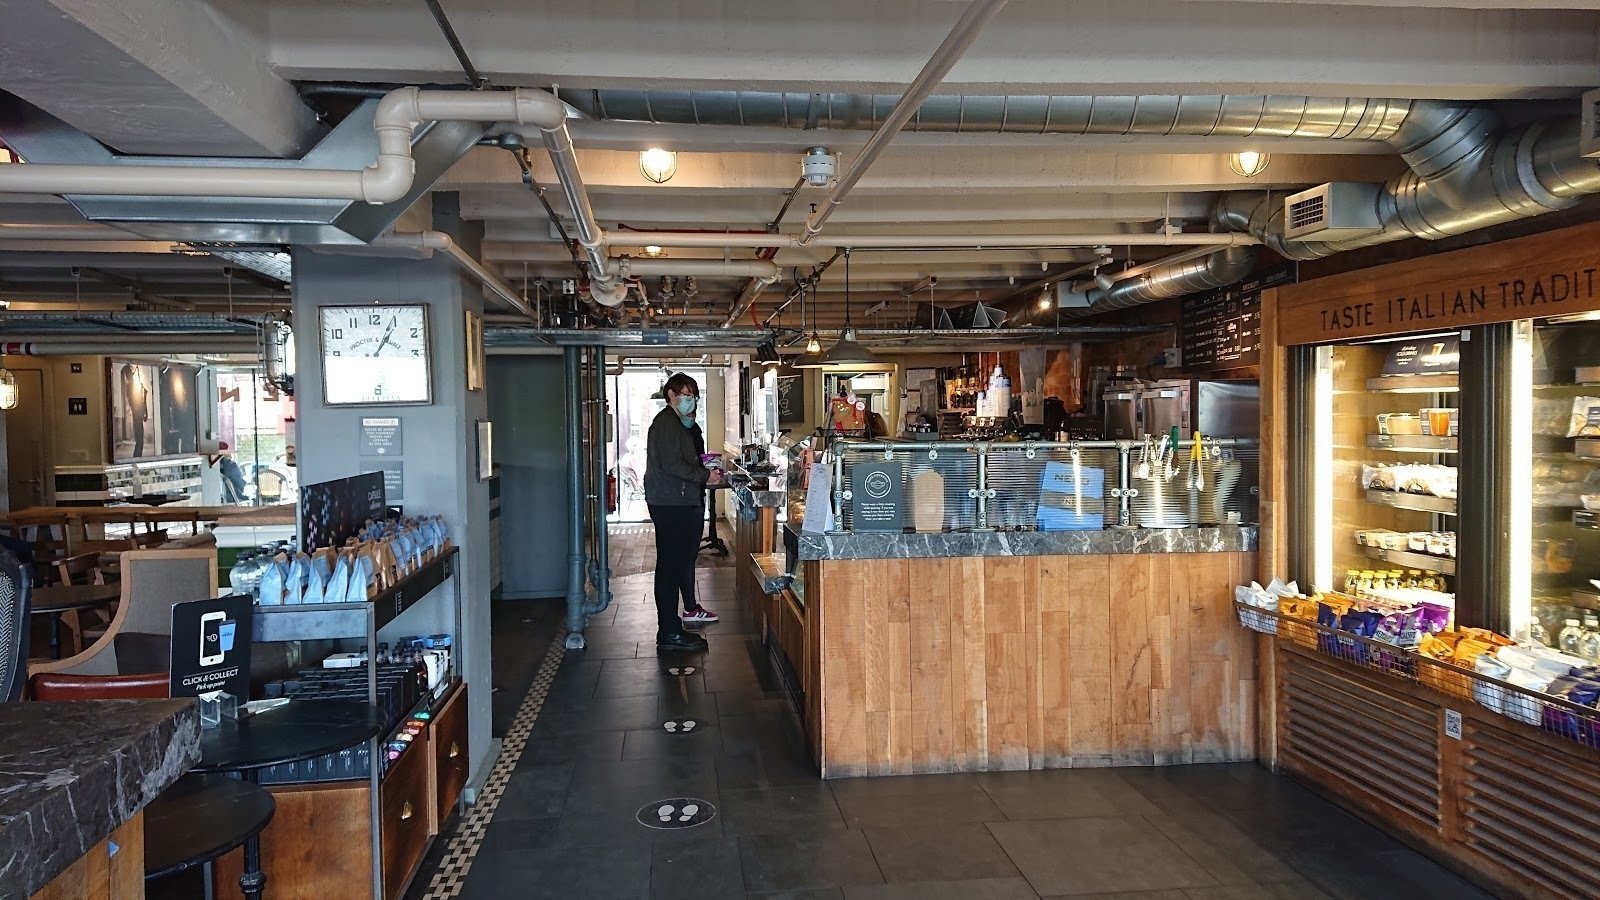 <span class="translation_missing" title="translation missing: en.meta.location_title, location_name: Caffè Nero @ Oxo Tower Wharf, city: London">Location Title</span>